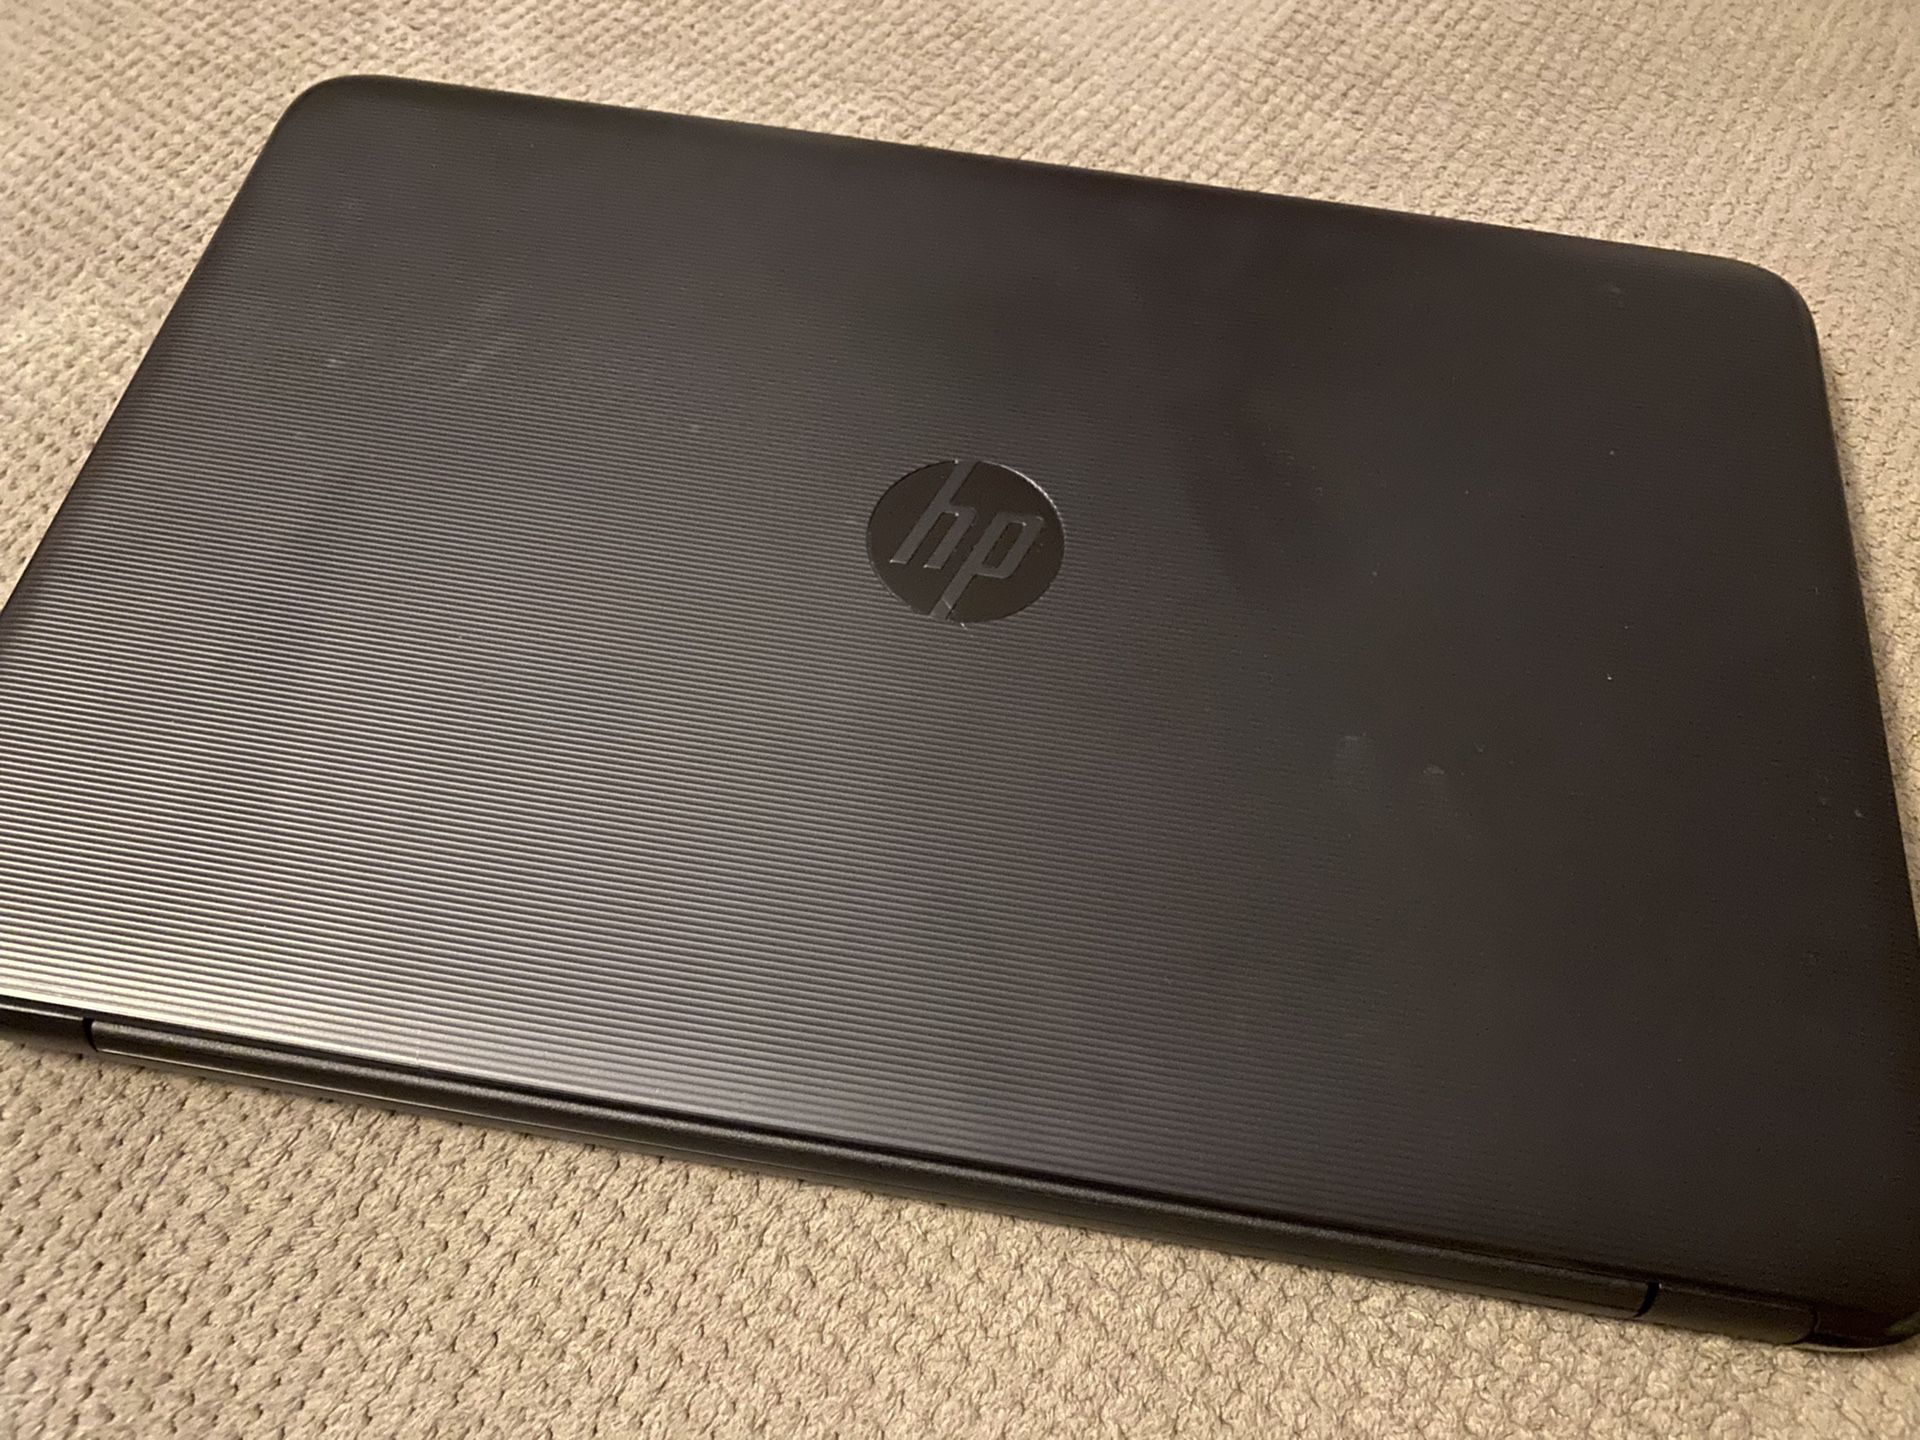 HP laptop / all sales shipped through the app, for both of our protection.